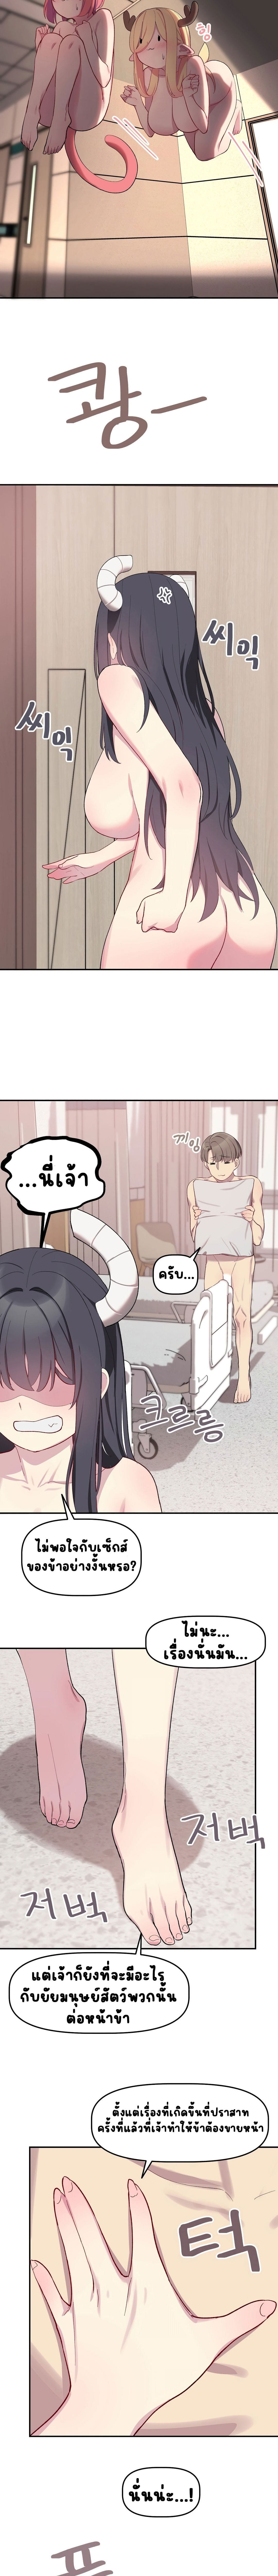 Hospitalized Life in Another World ตอนที่ 4 ภาพ 15